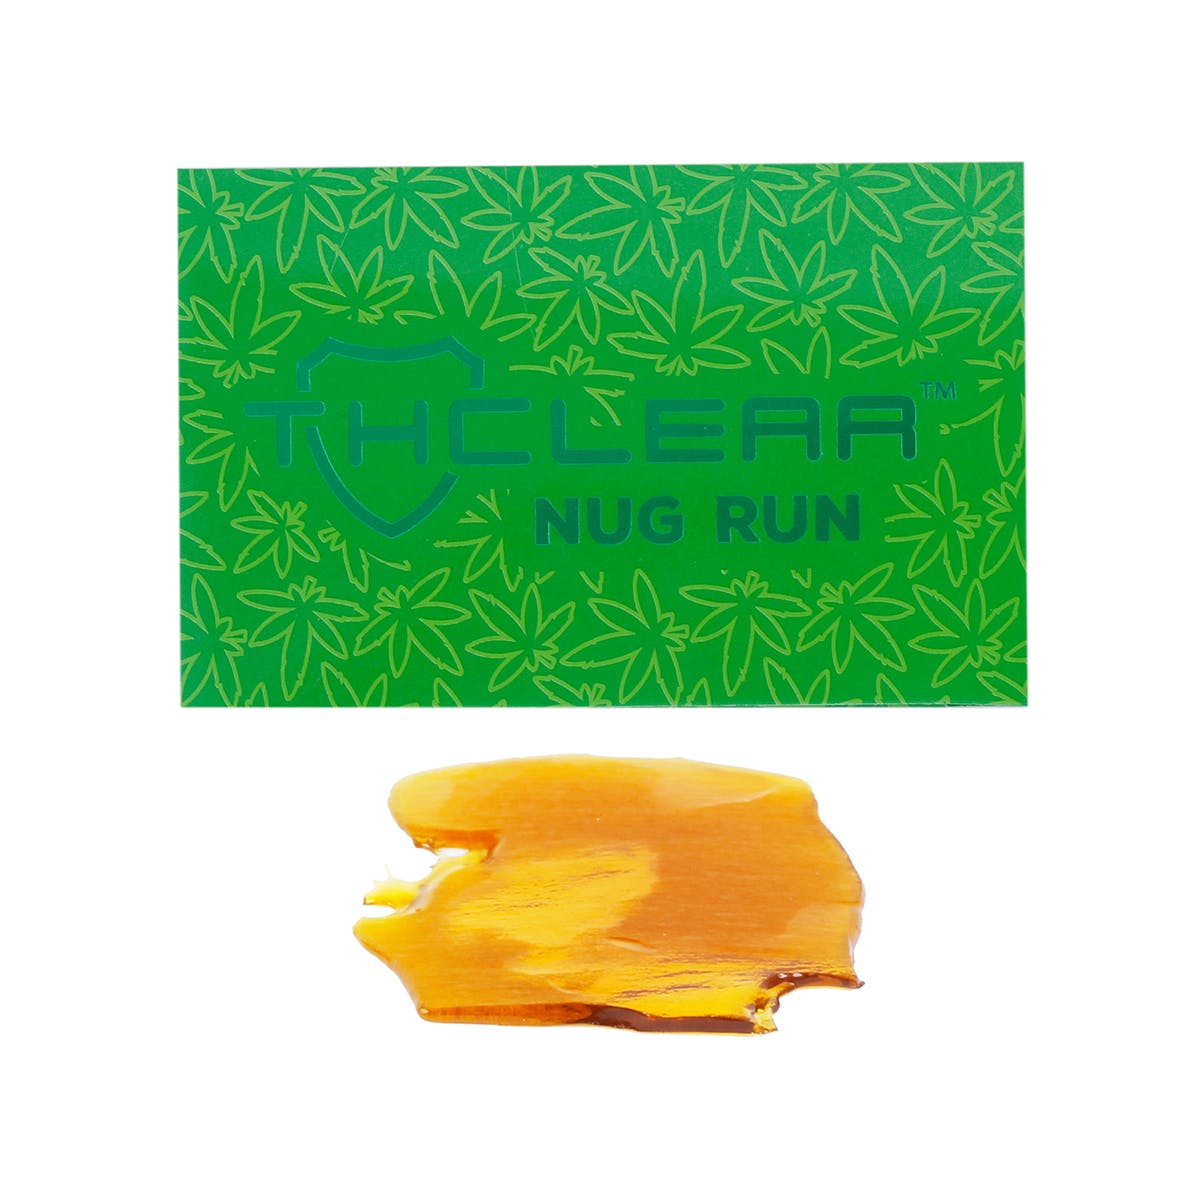 marijuana-dispensaries-manchester-remedy-in-los-angeles-thclear-co-nug-run-shatter